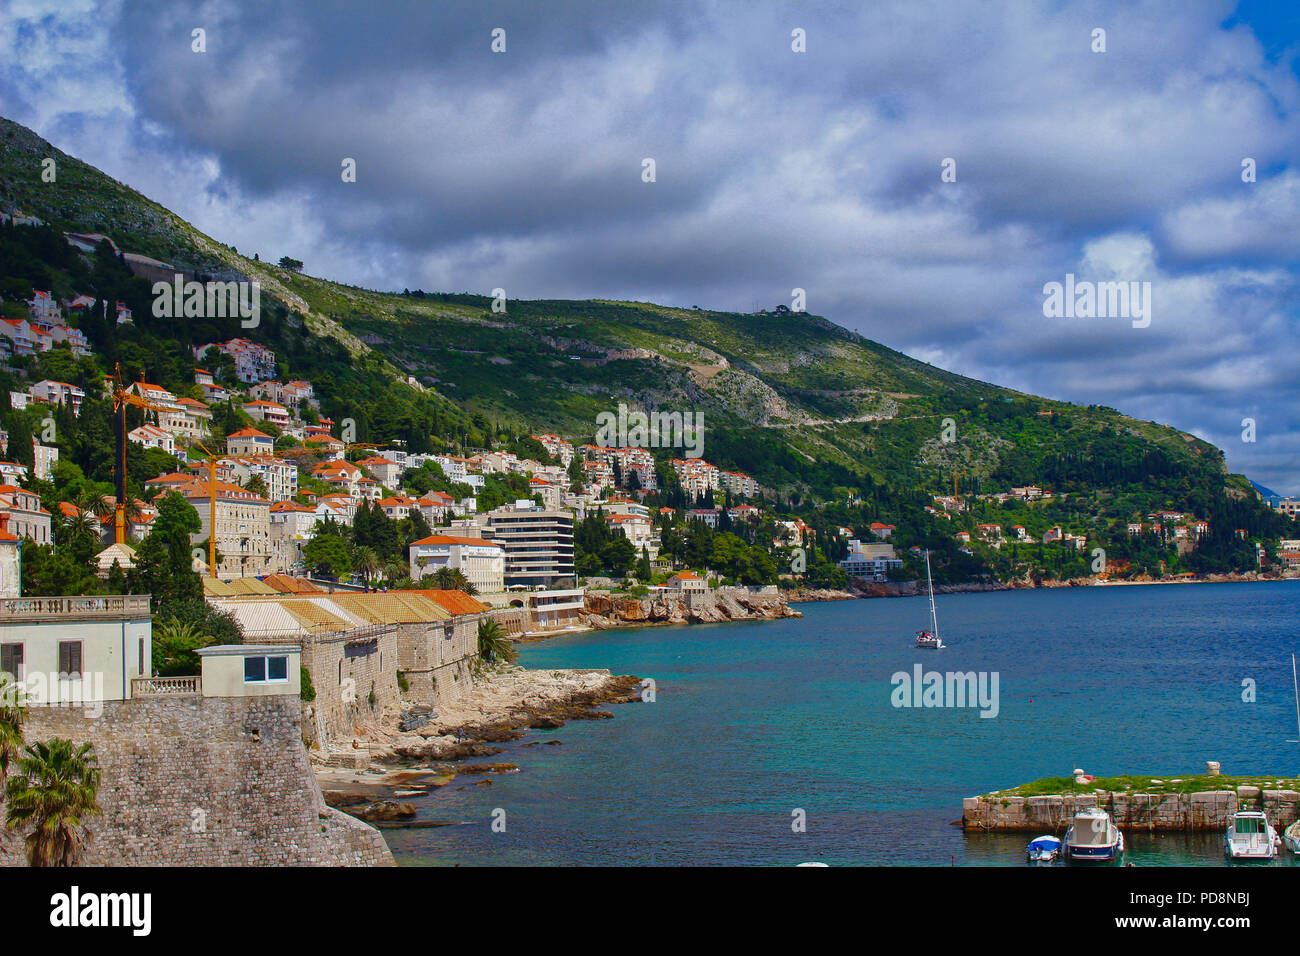 A view towards the harbor of the old town of Dubrovnik, Croatia and the Adriatic sea from the city walls Stock Photo